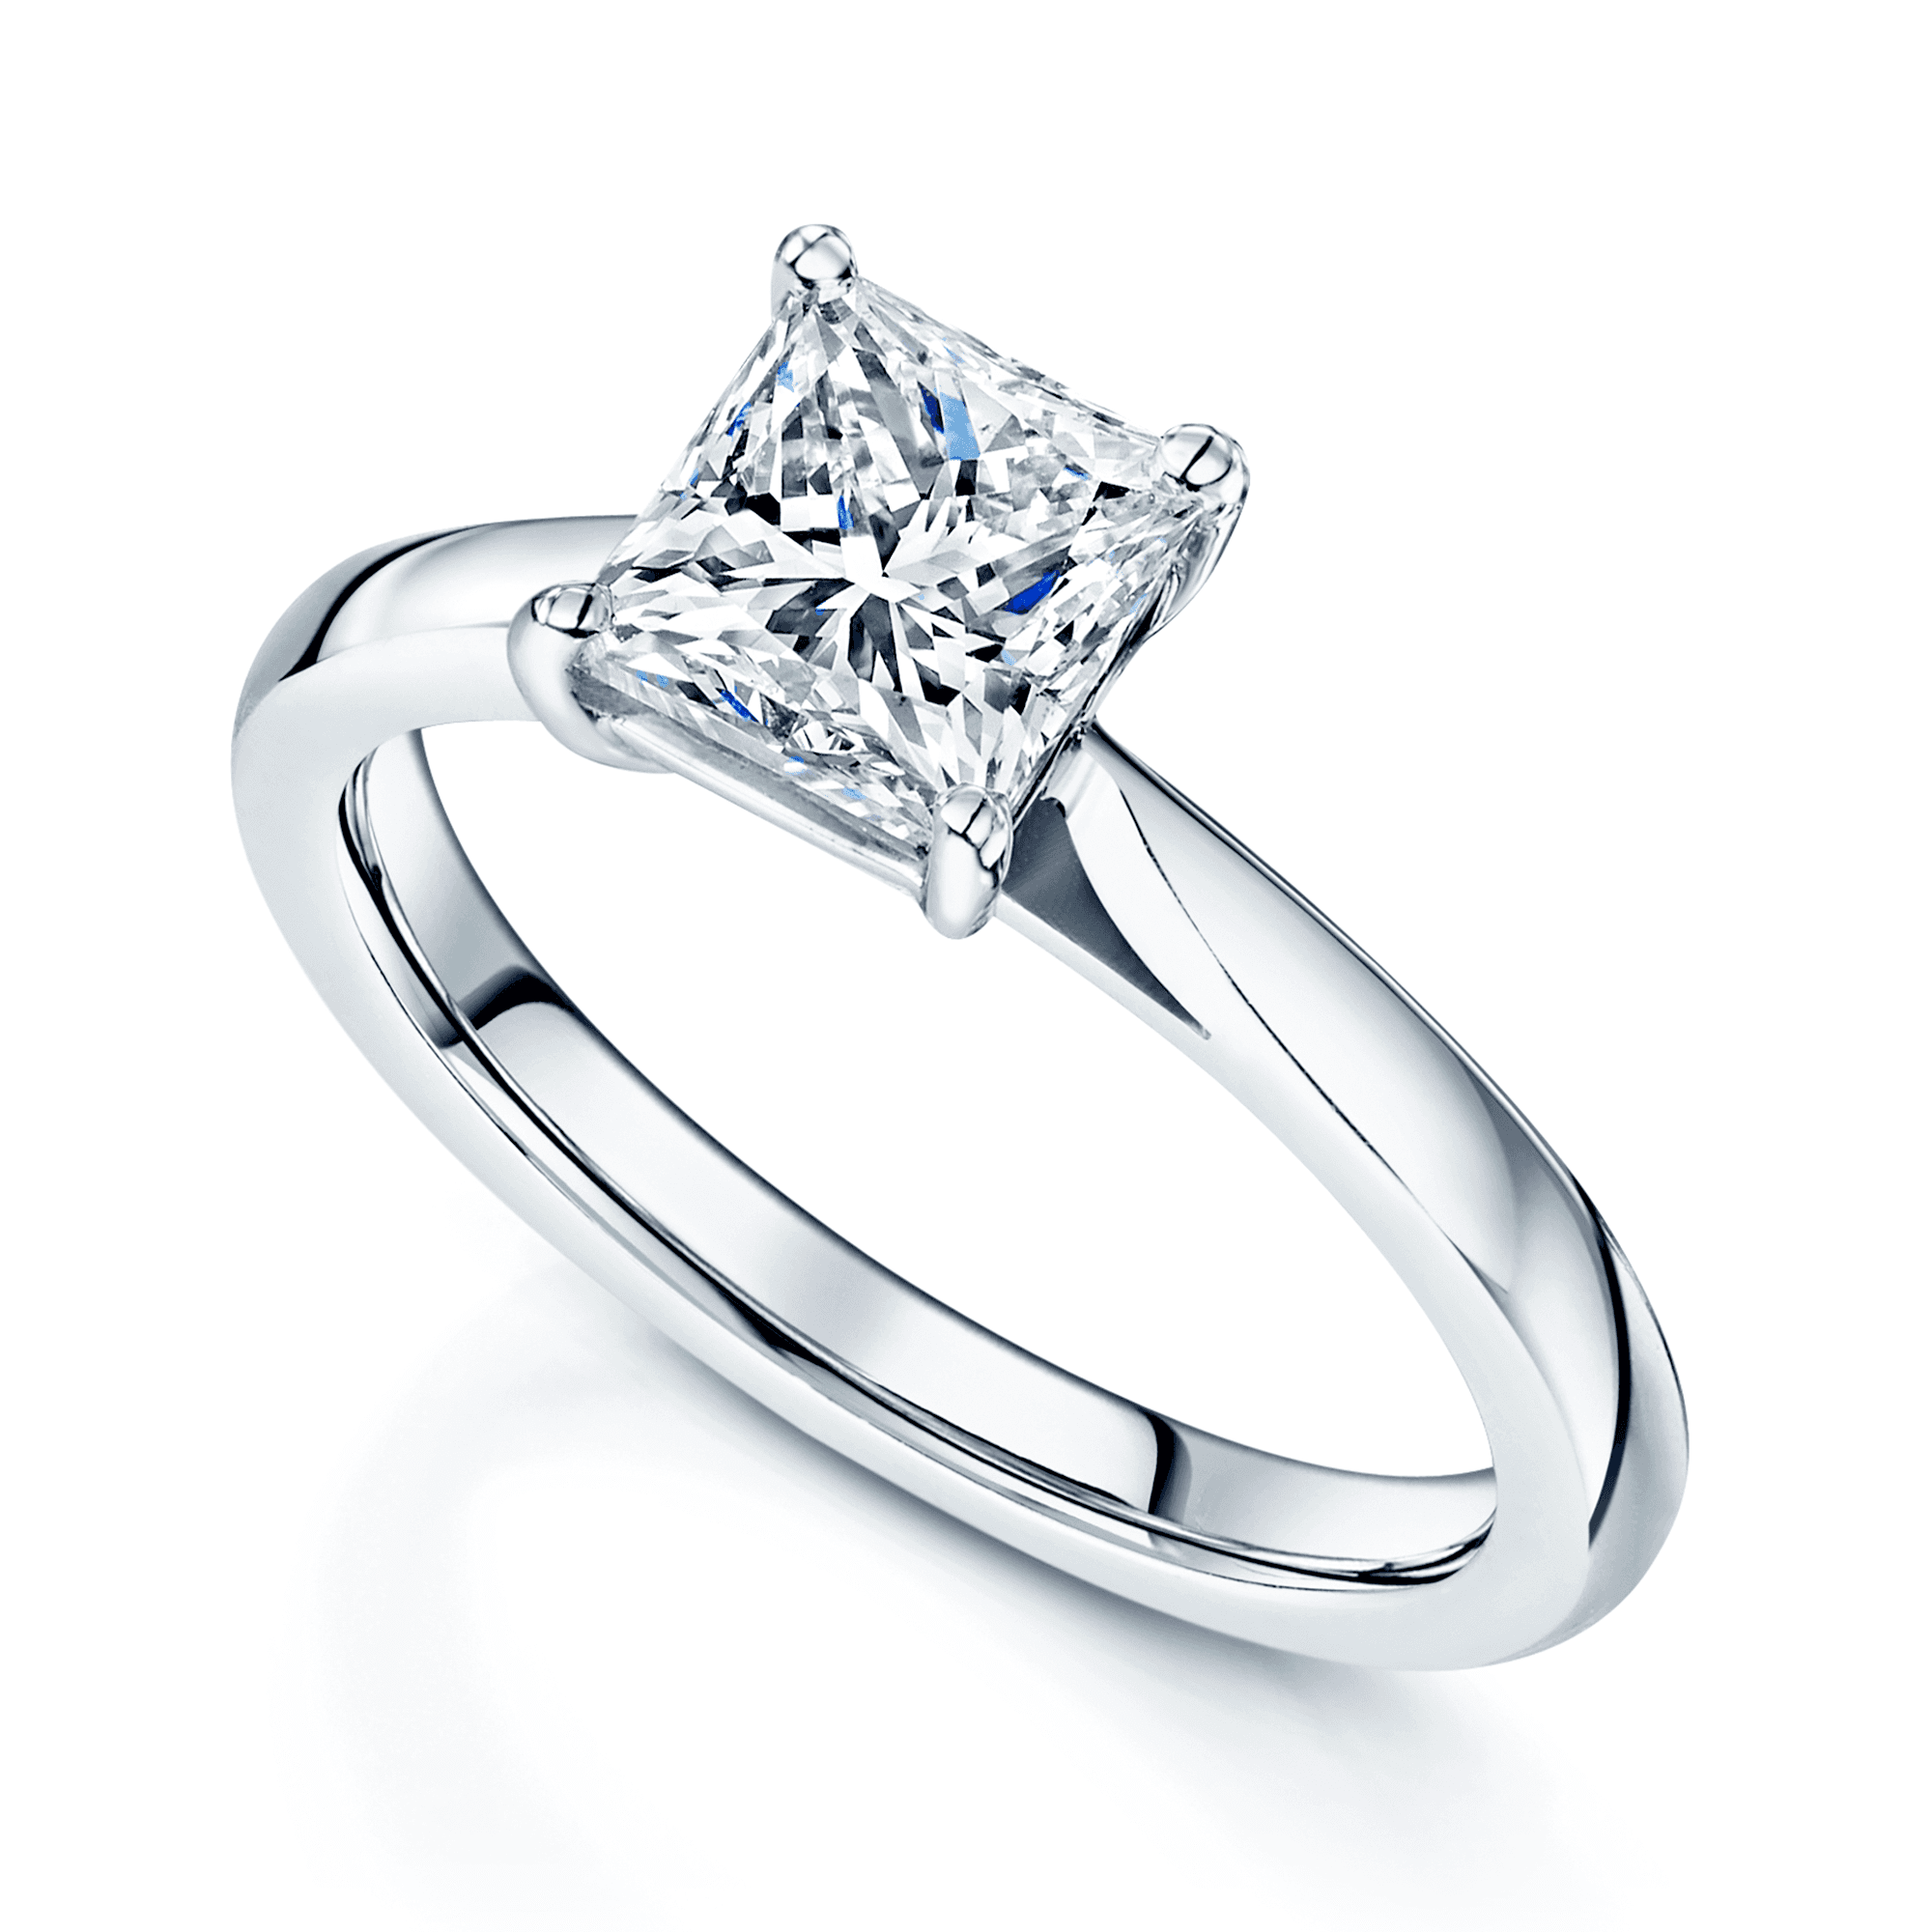 Platinum Princess Cut Solitaire Diamond Ring With A Four Claw Setting